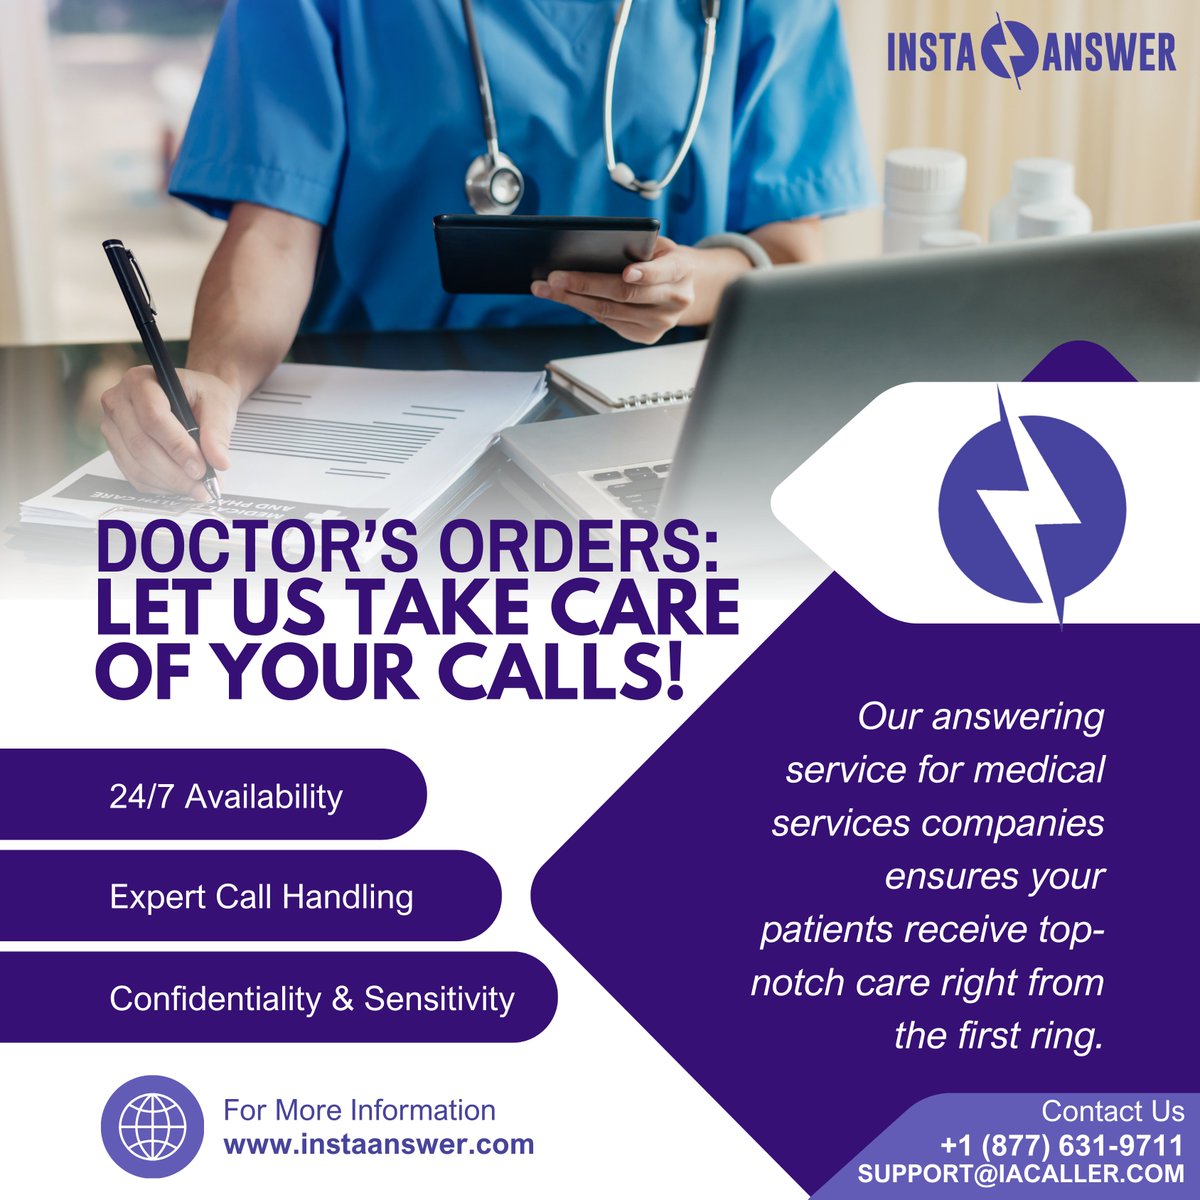 Prescribing peace of mind, one call at a time! Our answering service for medical services companies ensures your calls and customer service are as healthy as can be.

Dial (877) 631-9711 or email support@iacaller.com to let us be your on-call remedy!

#InstaAnswer #Rx #CSR